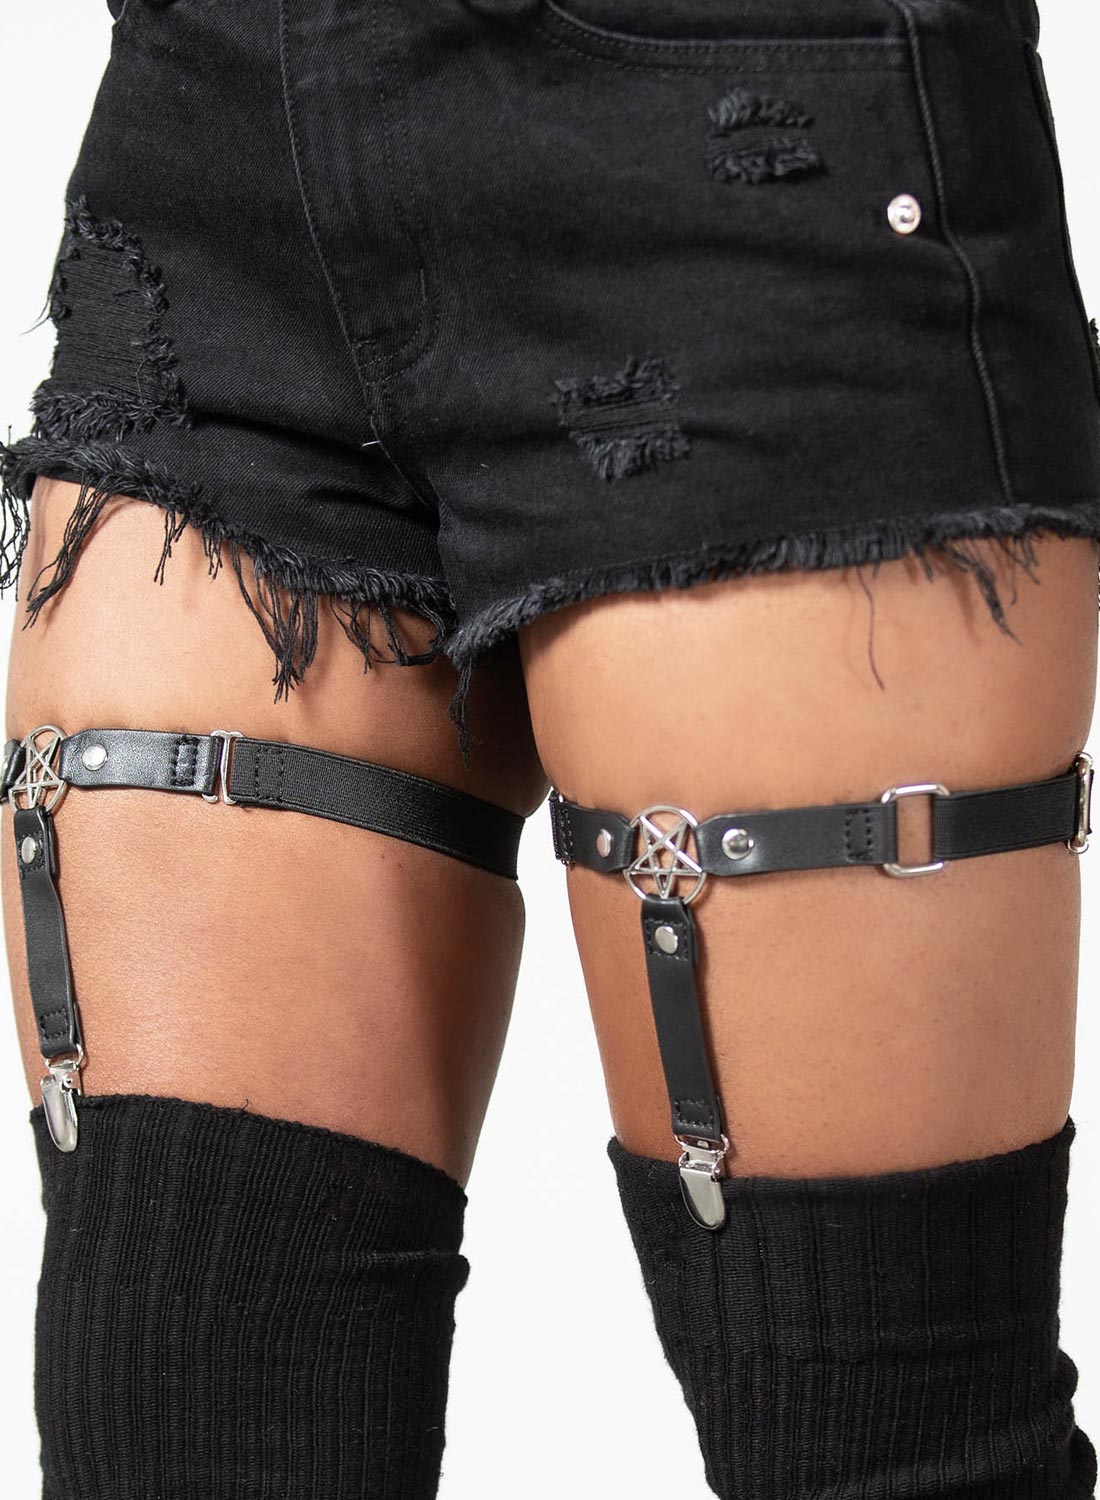 Star Strapped Garters